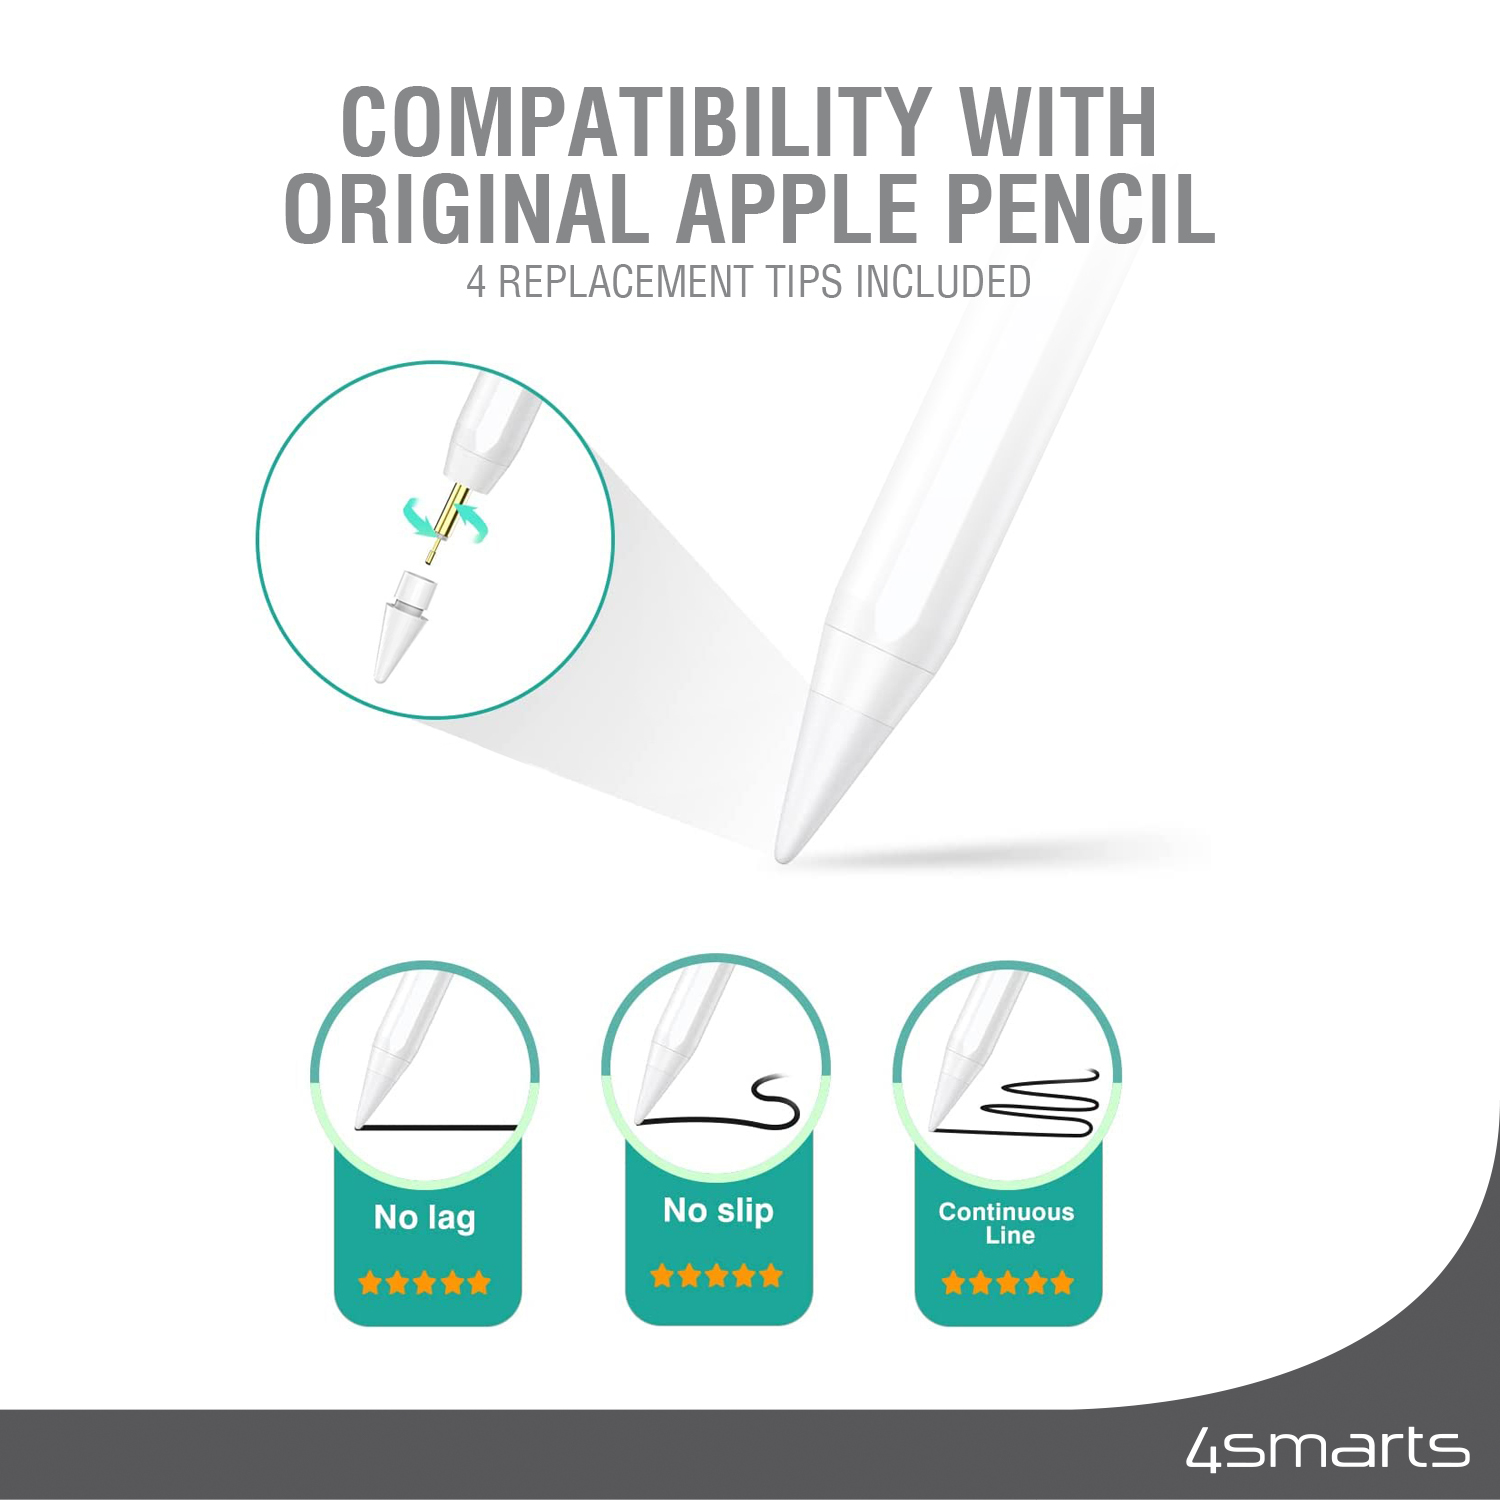 The 4smarts Tip Replacement Set of 4 is compatible with the original Apple Pencil.